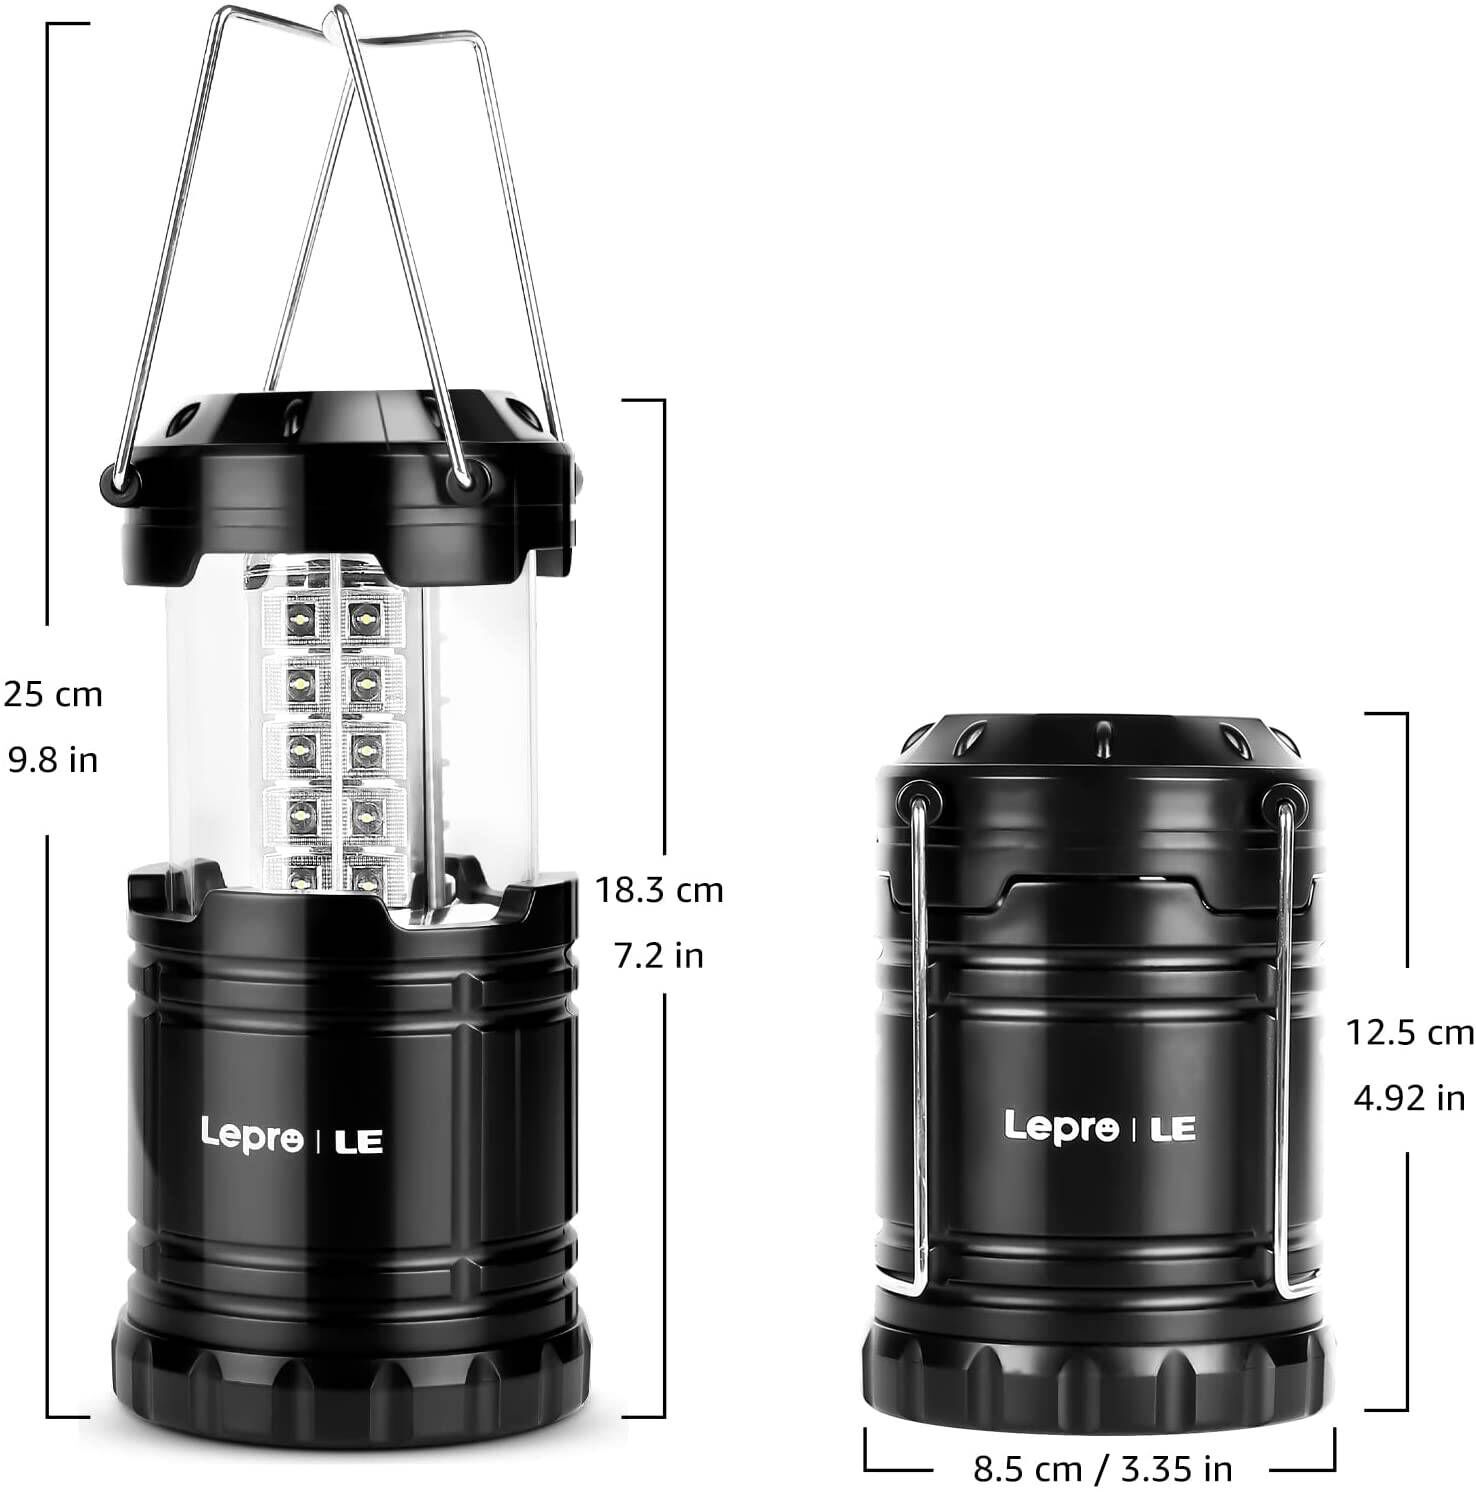 2023 Summer Savings! WJSXC Portable Camping Lantern,LED Rechargeable  Camping Lights,IPX4 WaterProof Survival Lantern for Hiking Camping